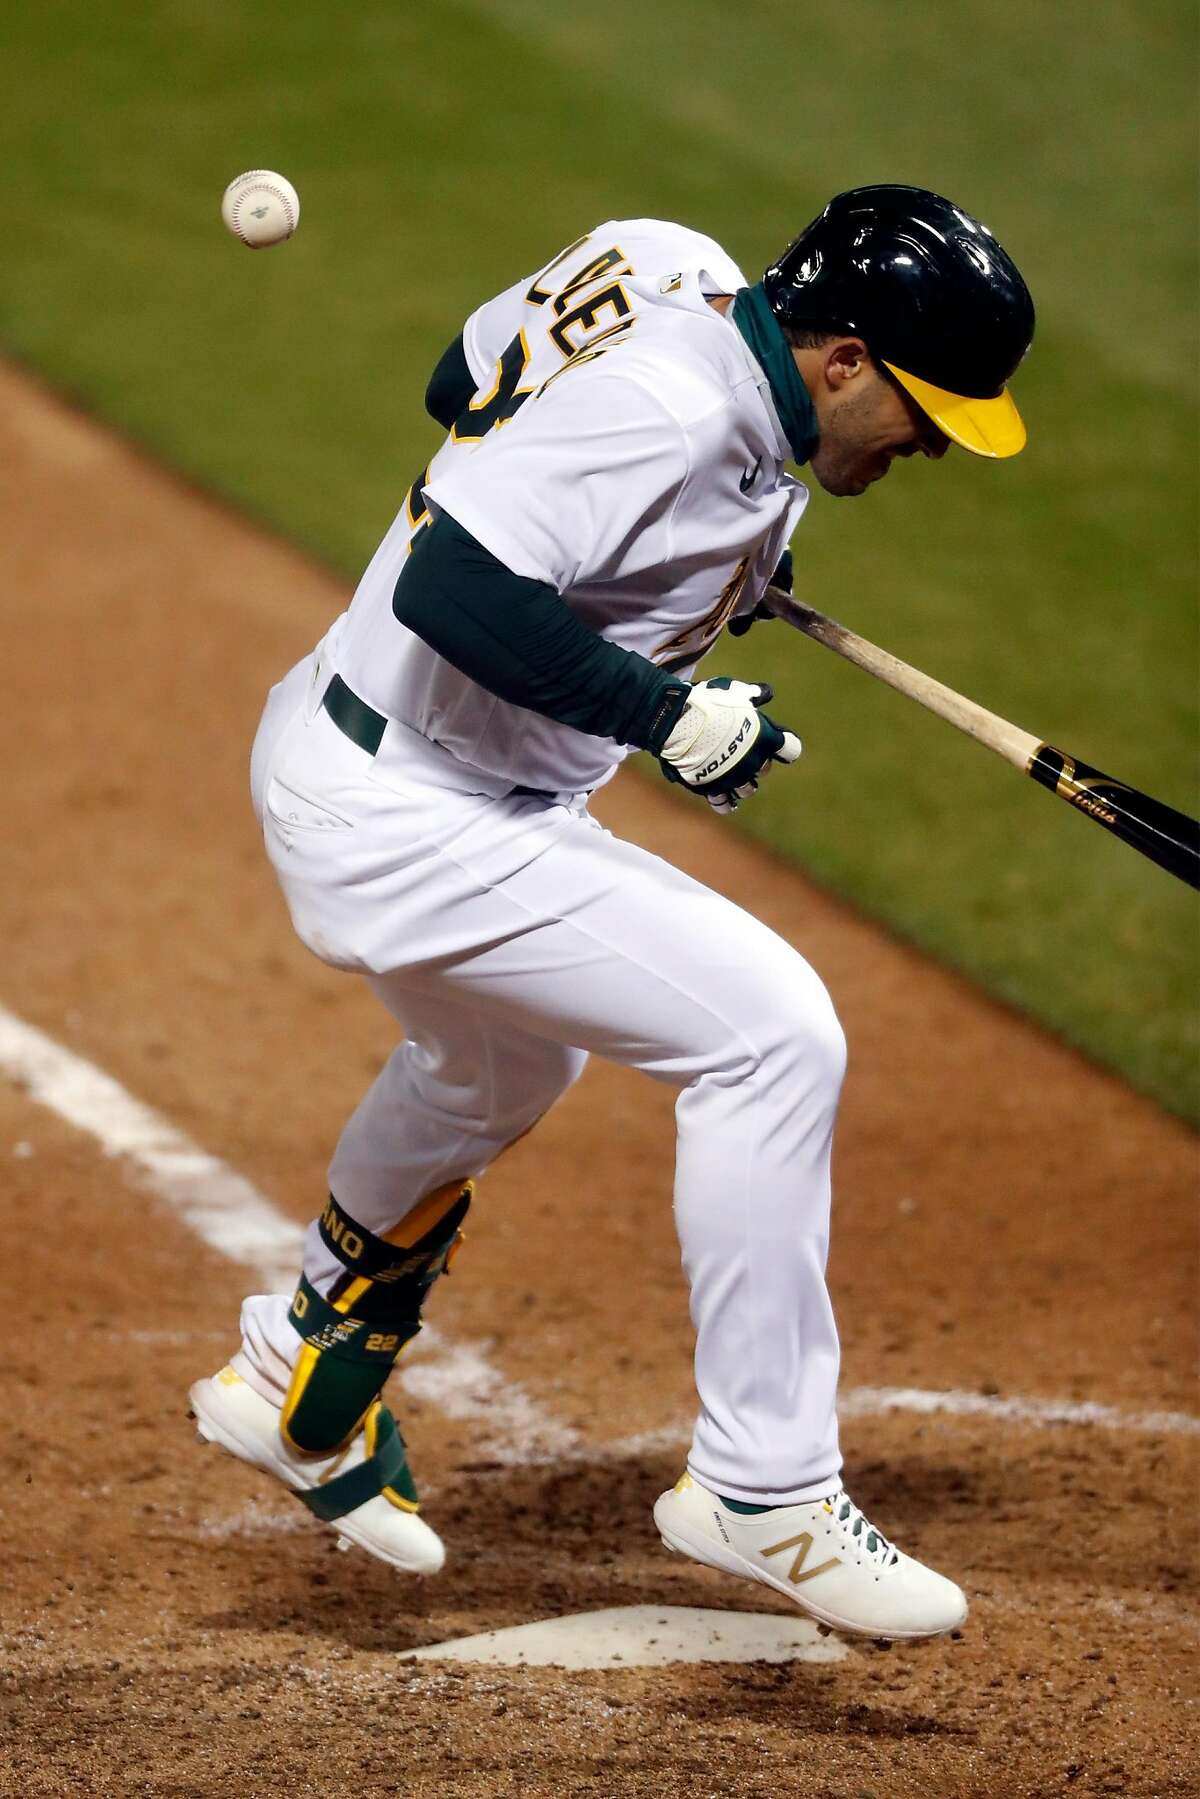 Oakland Athletics' Ramon Laureano is hit by a pitch in 10th inning of 7-3 win over Los Angeles Angels during MLB game at Oakland Coliseum in Oakland, Calif., on Friday, July 24, 2020.